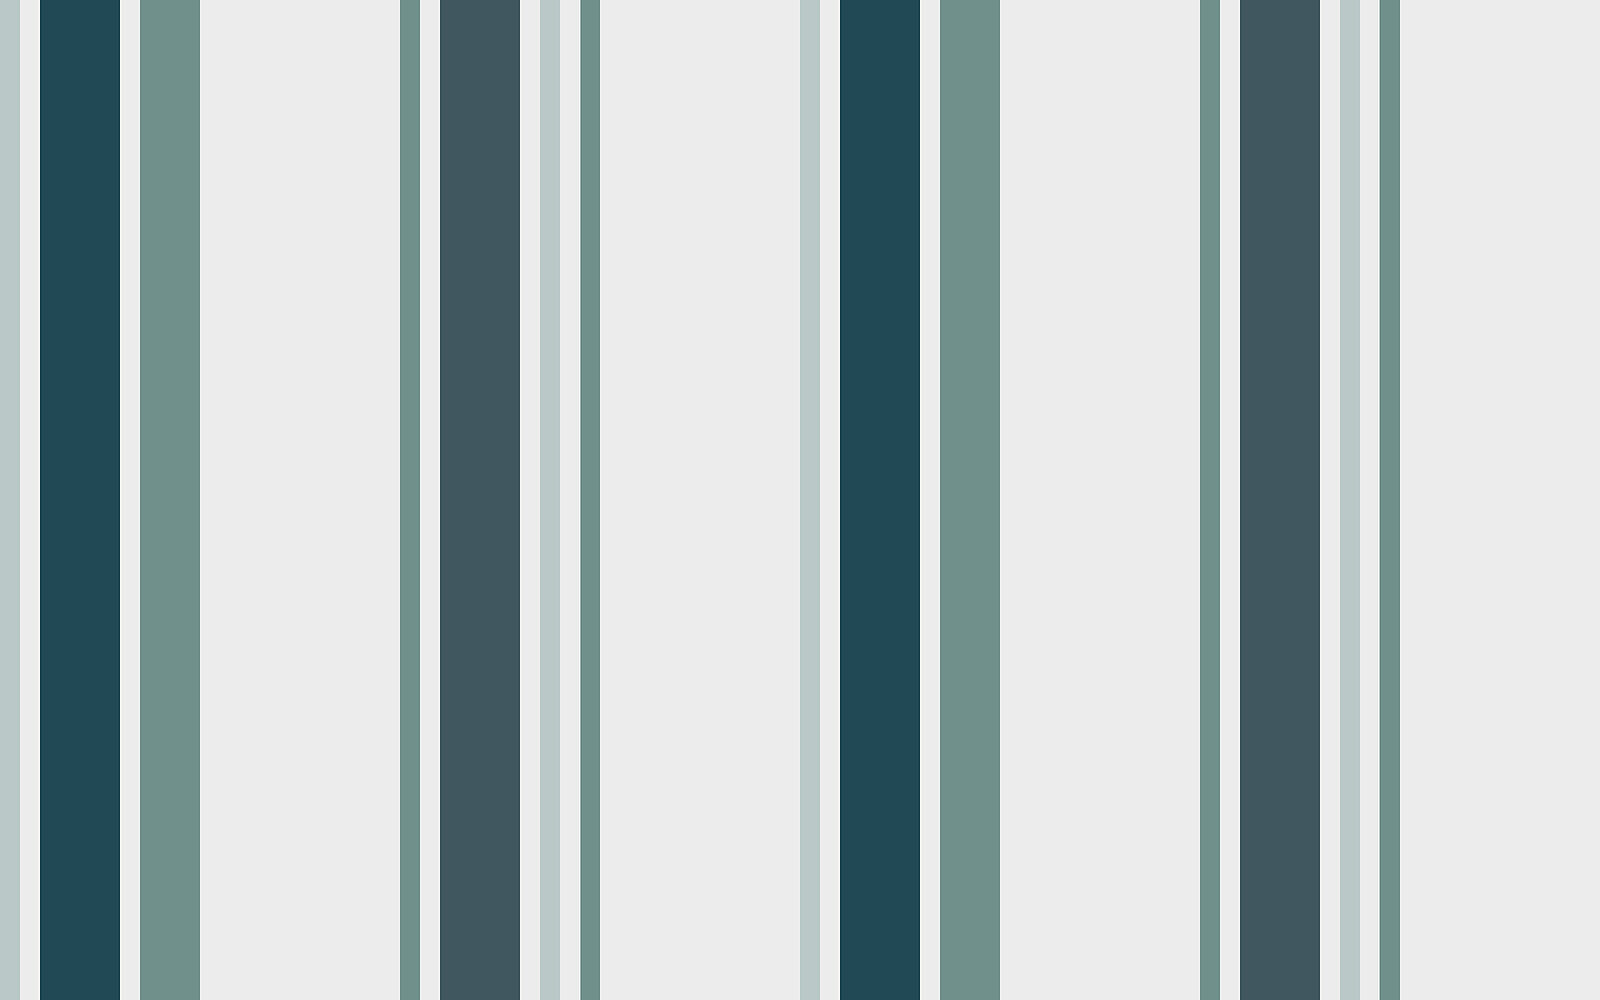 Classic striped geometric seamless pattern in a soft green palette. Vertical parallel stripes on a light background. Home interior decoration design.